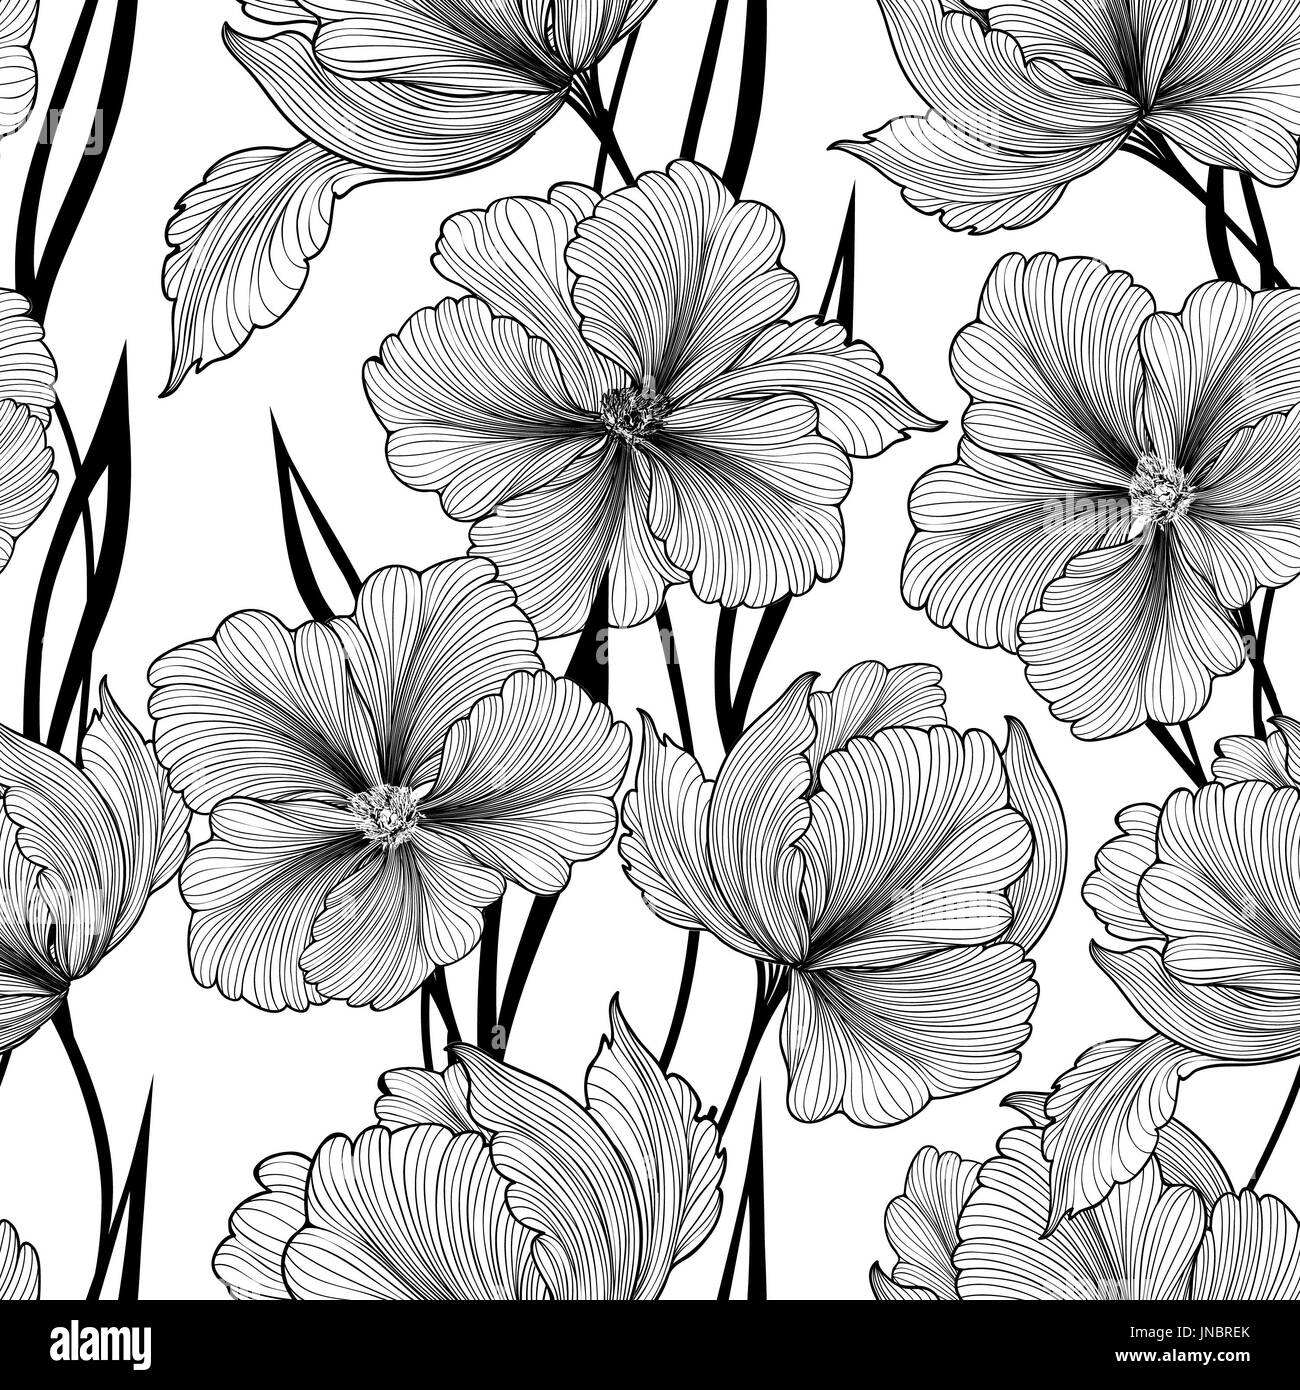 Floral seamless pattern. Flower background. Floral seamless texture with flowers. Flourish tiled wallpaper Stock Photo